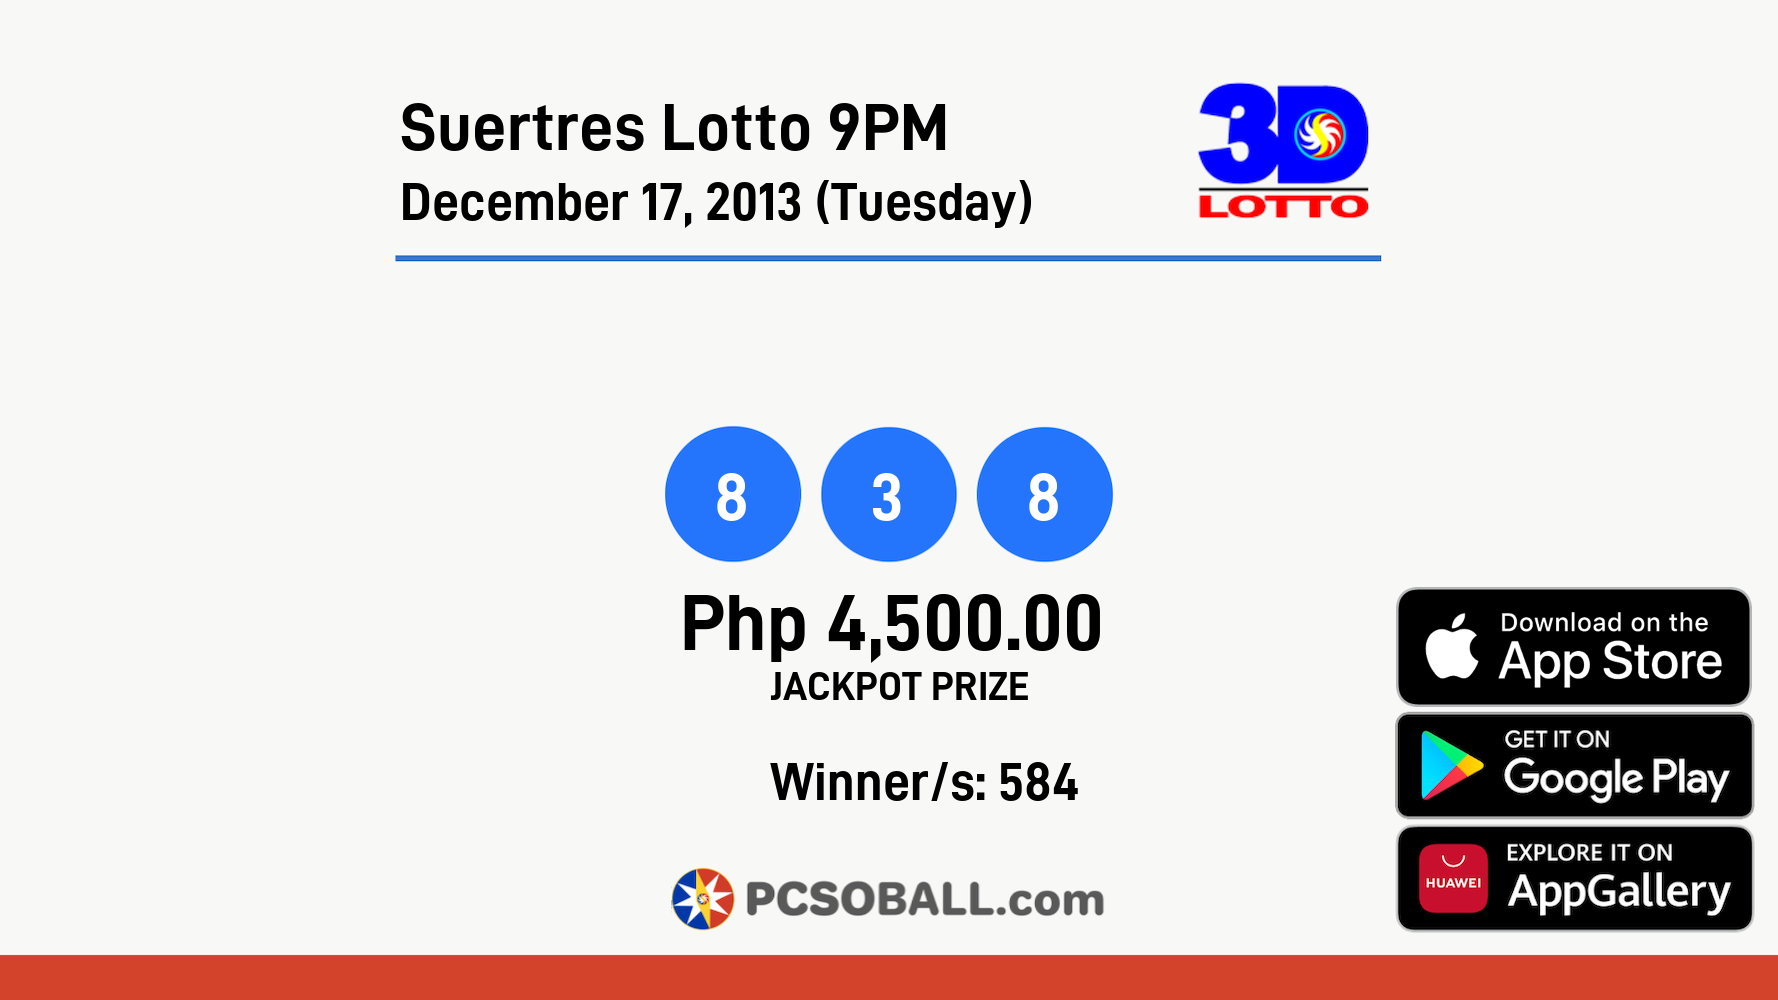 Suertres Lotto 9PM December 17, 2013 (Tuesday) Result